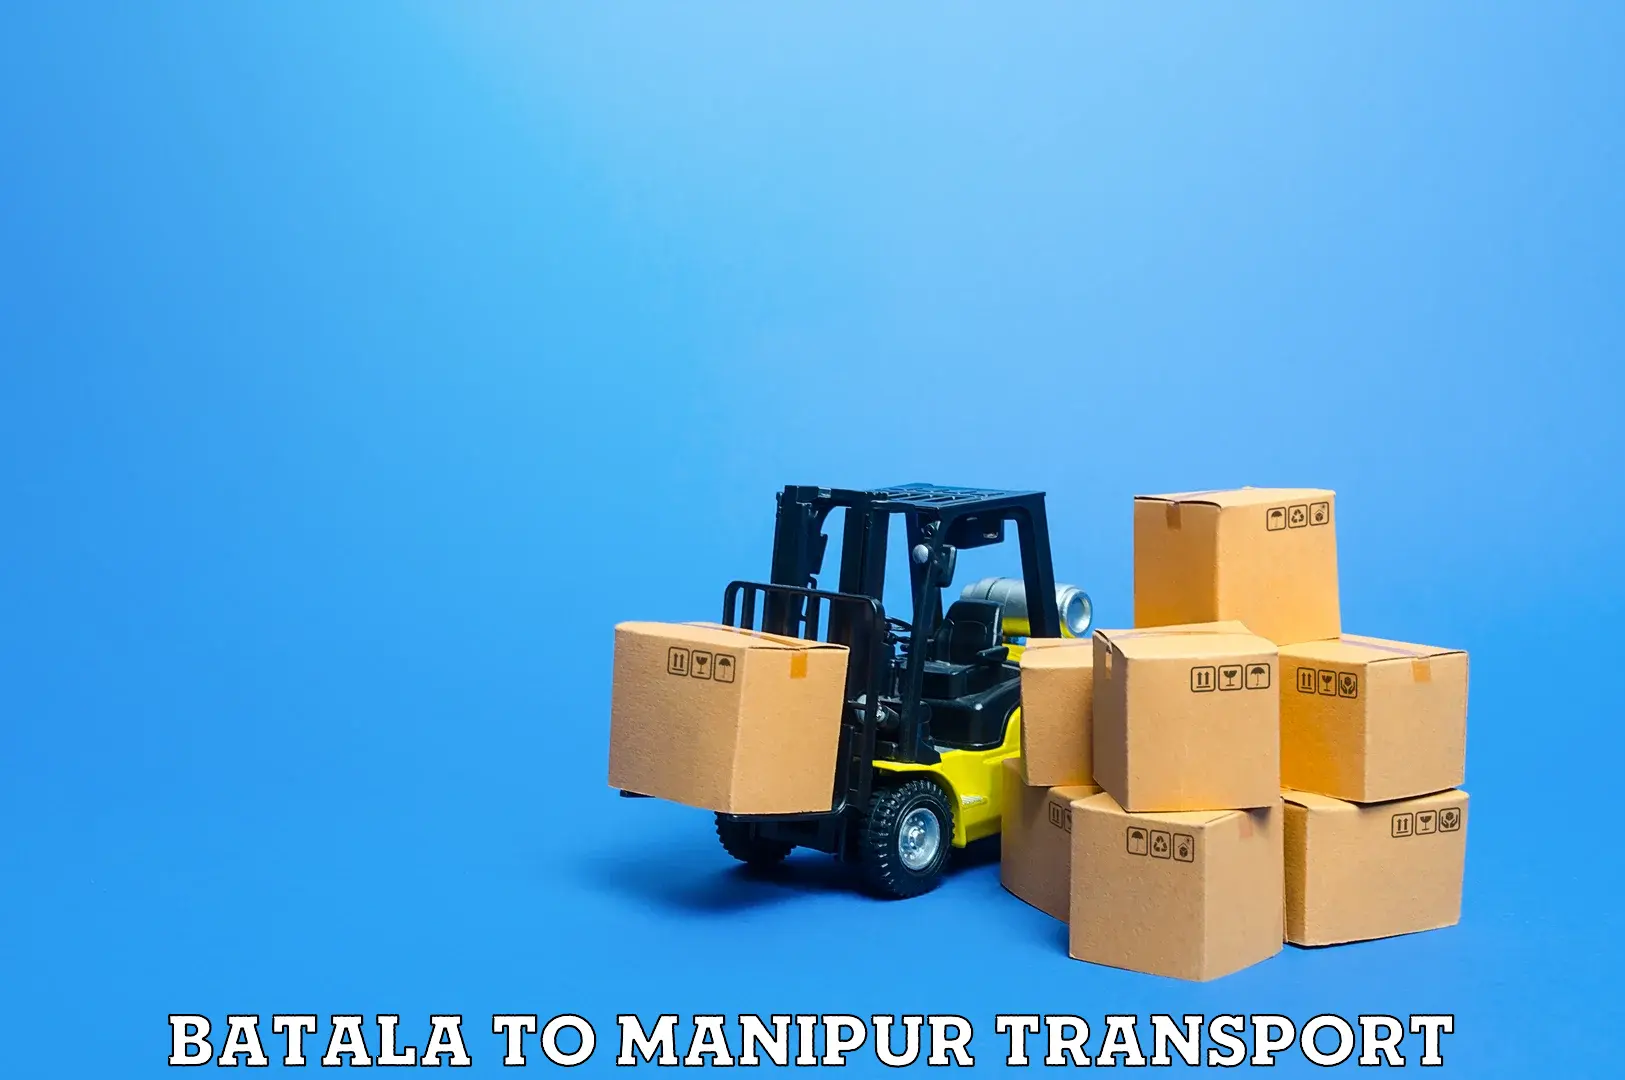 Nearby transport service Batala to Manipur